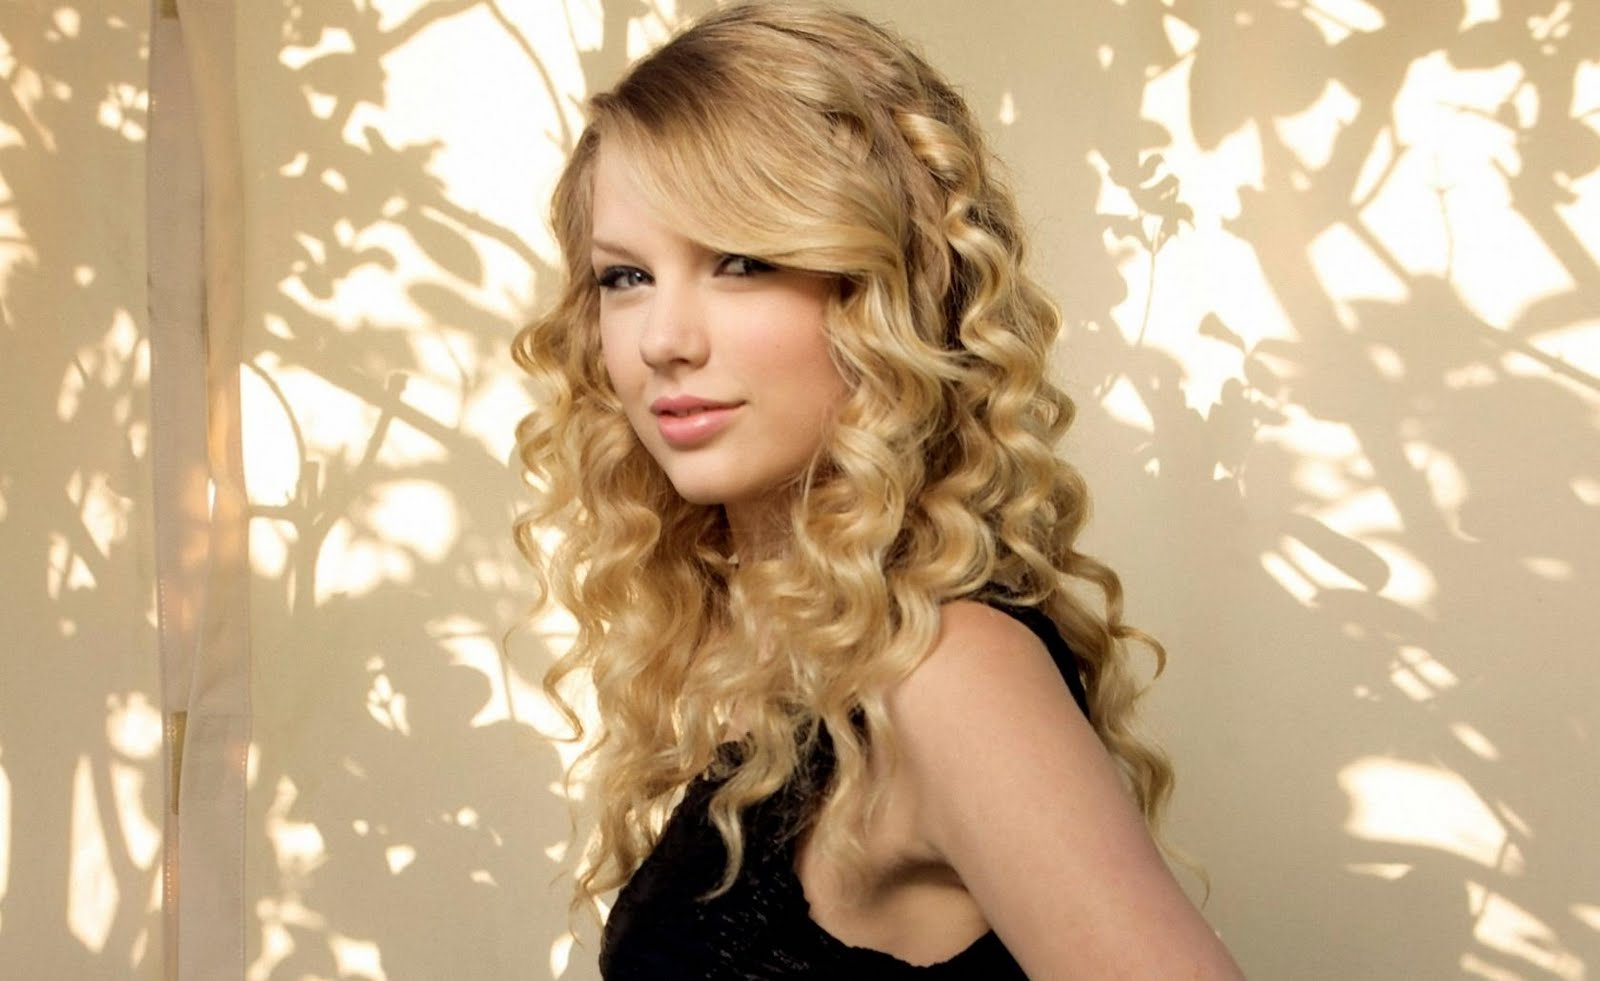 Taylor-Swift-Wallpaper-HD-Pictures-and-Photos.jpg